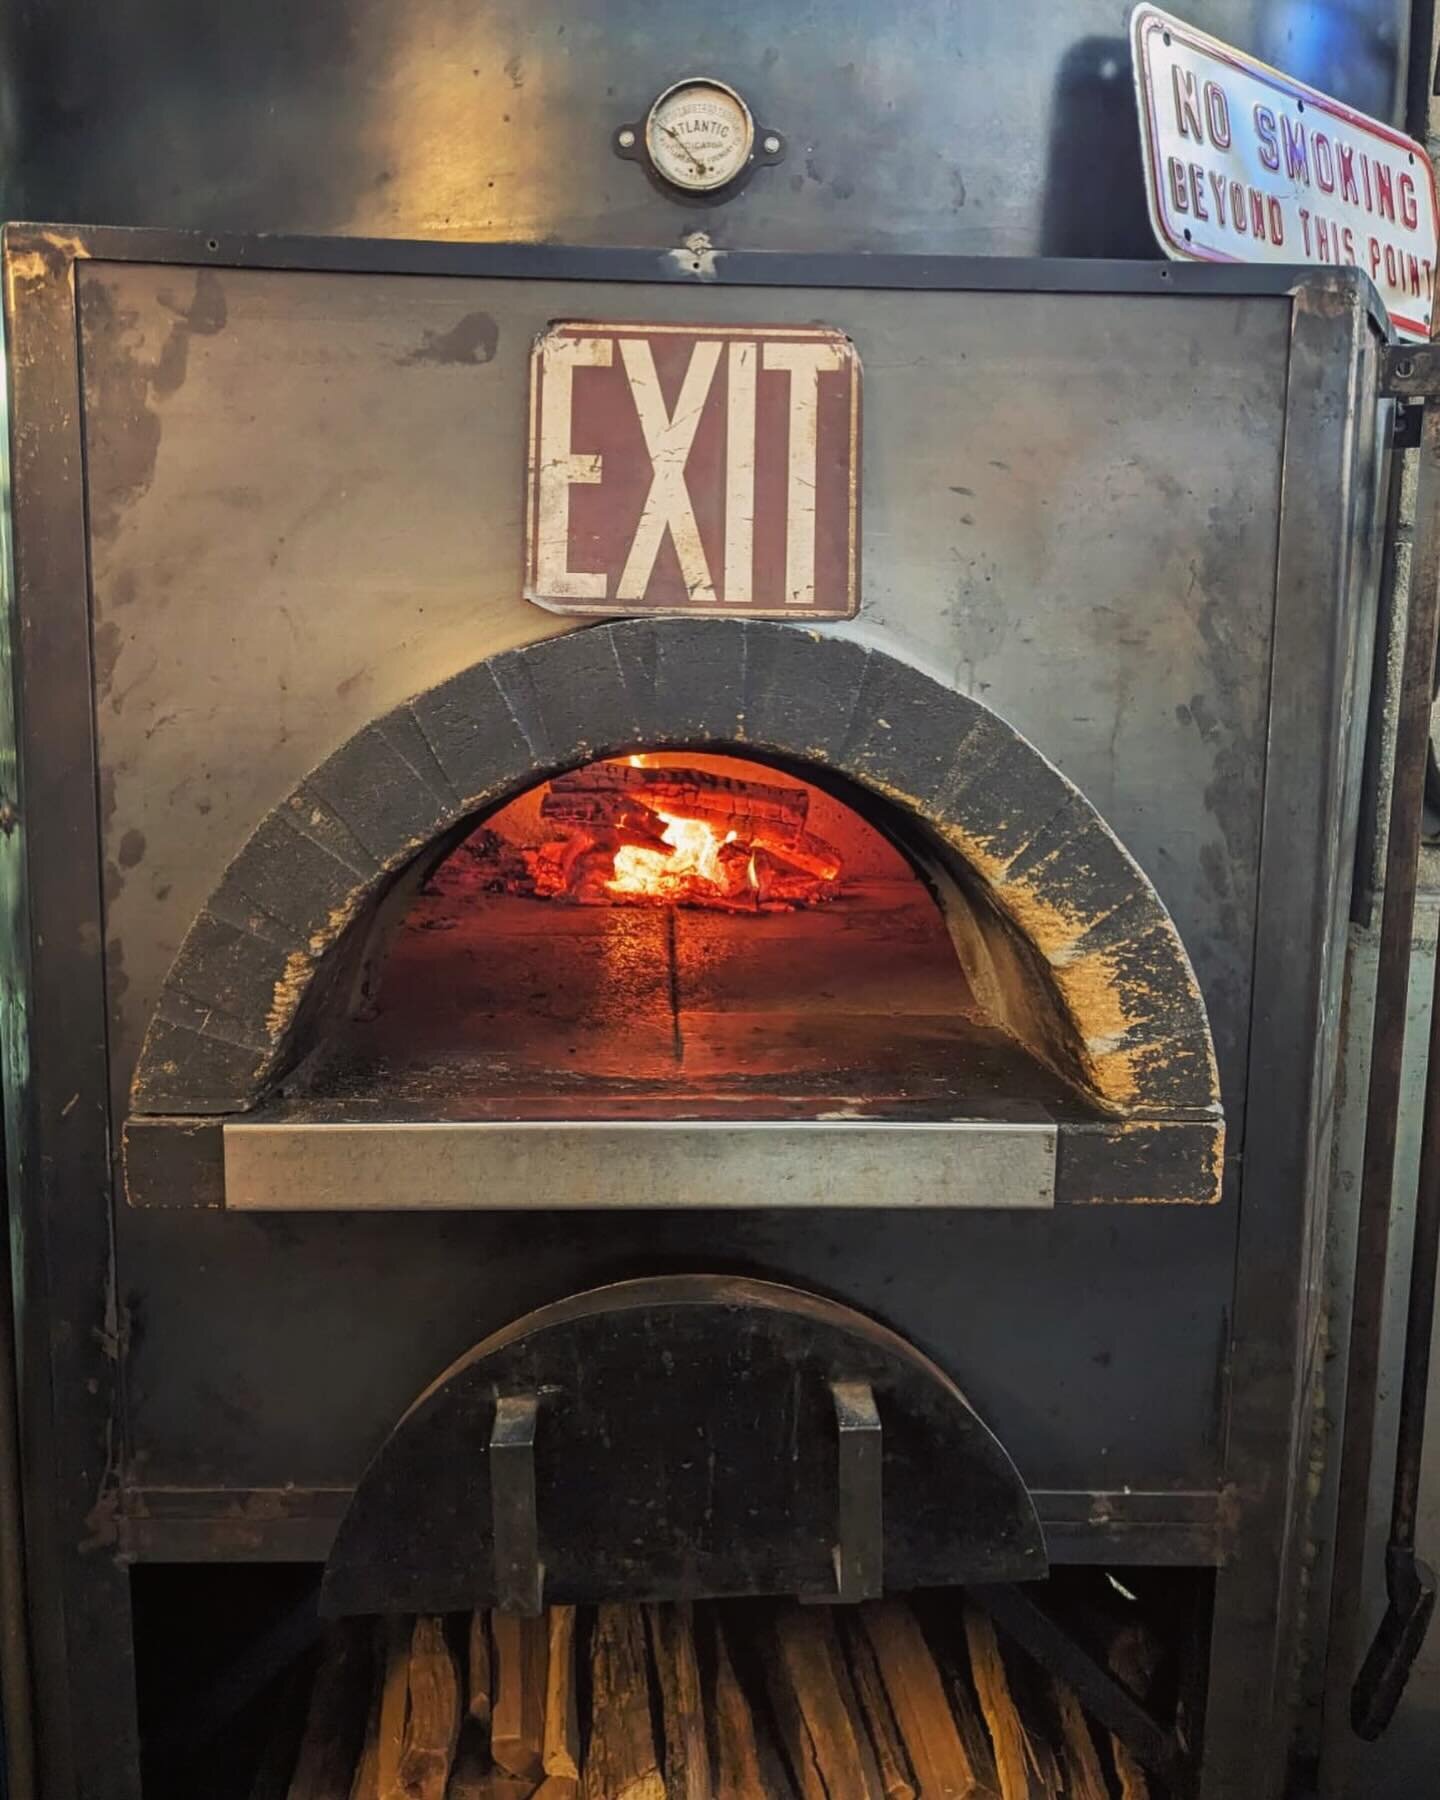 Winter update: 🔥 we&rsquo;ll be closed on Tuesdays! 🔥

We&rsquo;ll be back to our regular schedule in the spring. In the meantime, come visit us Wednesday-Monday! 🍕